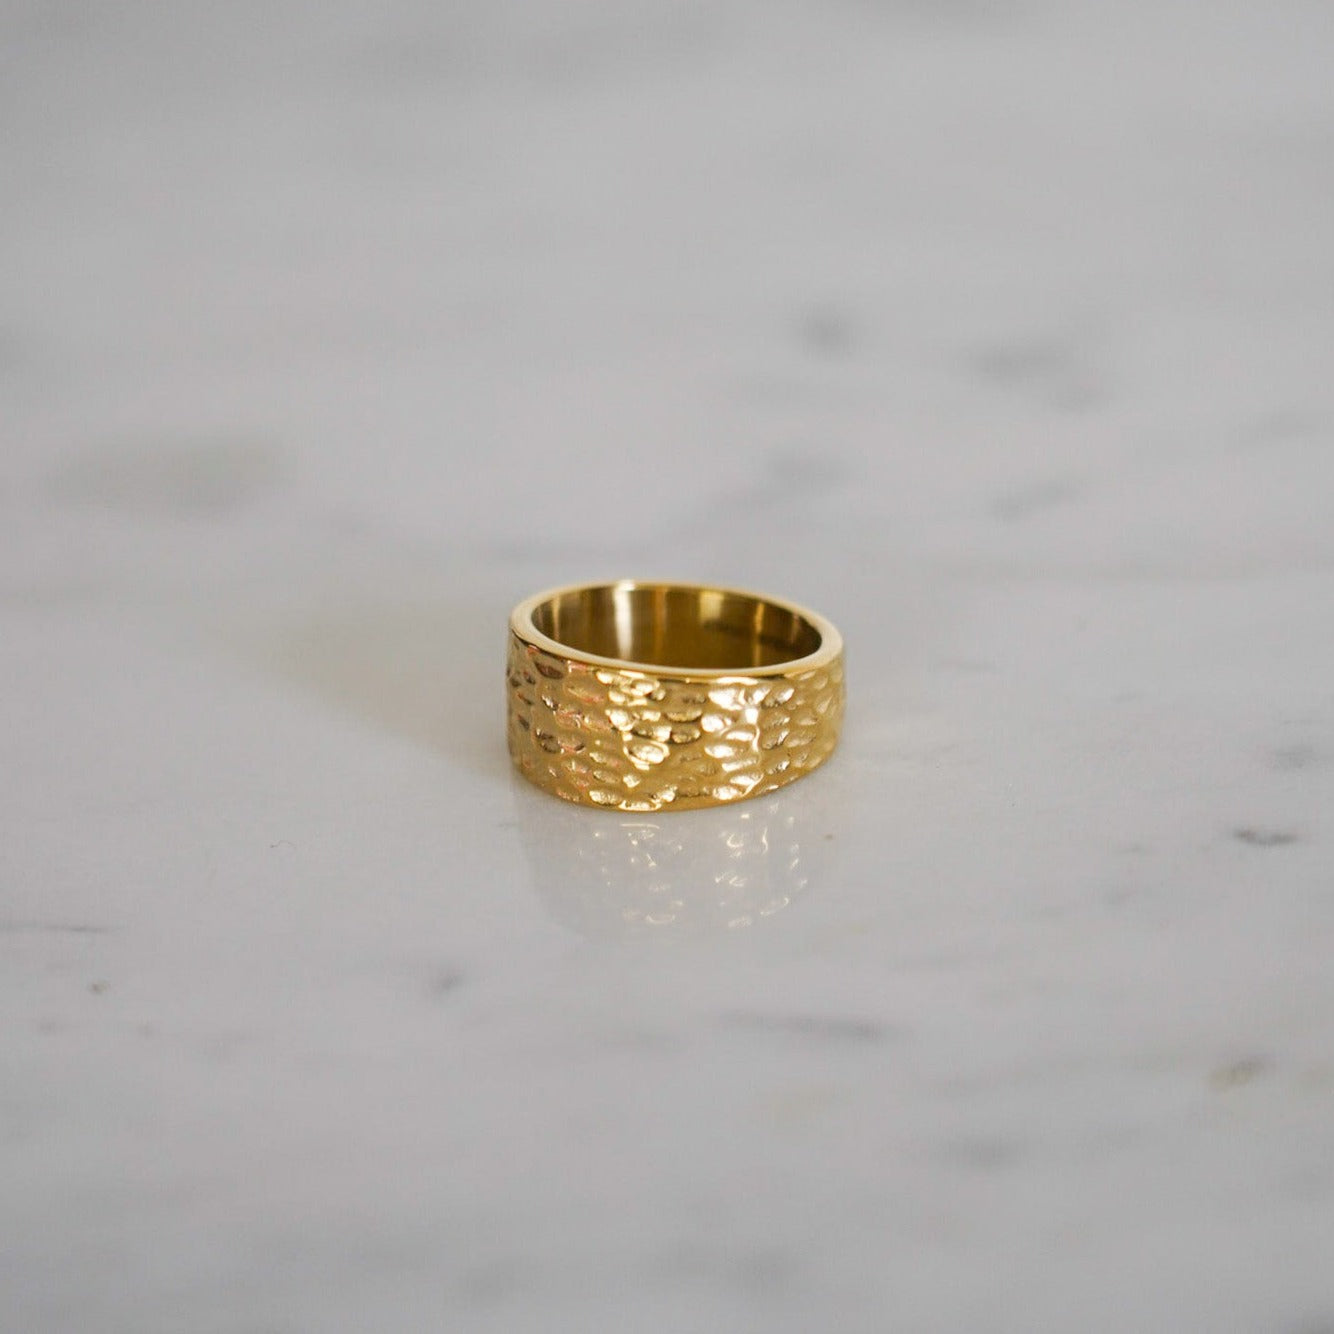 Hammered Signature - Gold-toned ring